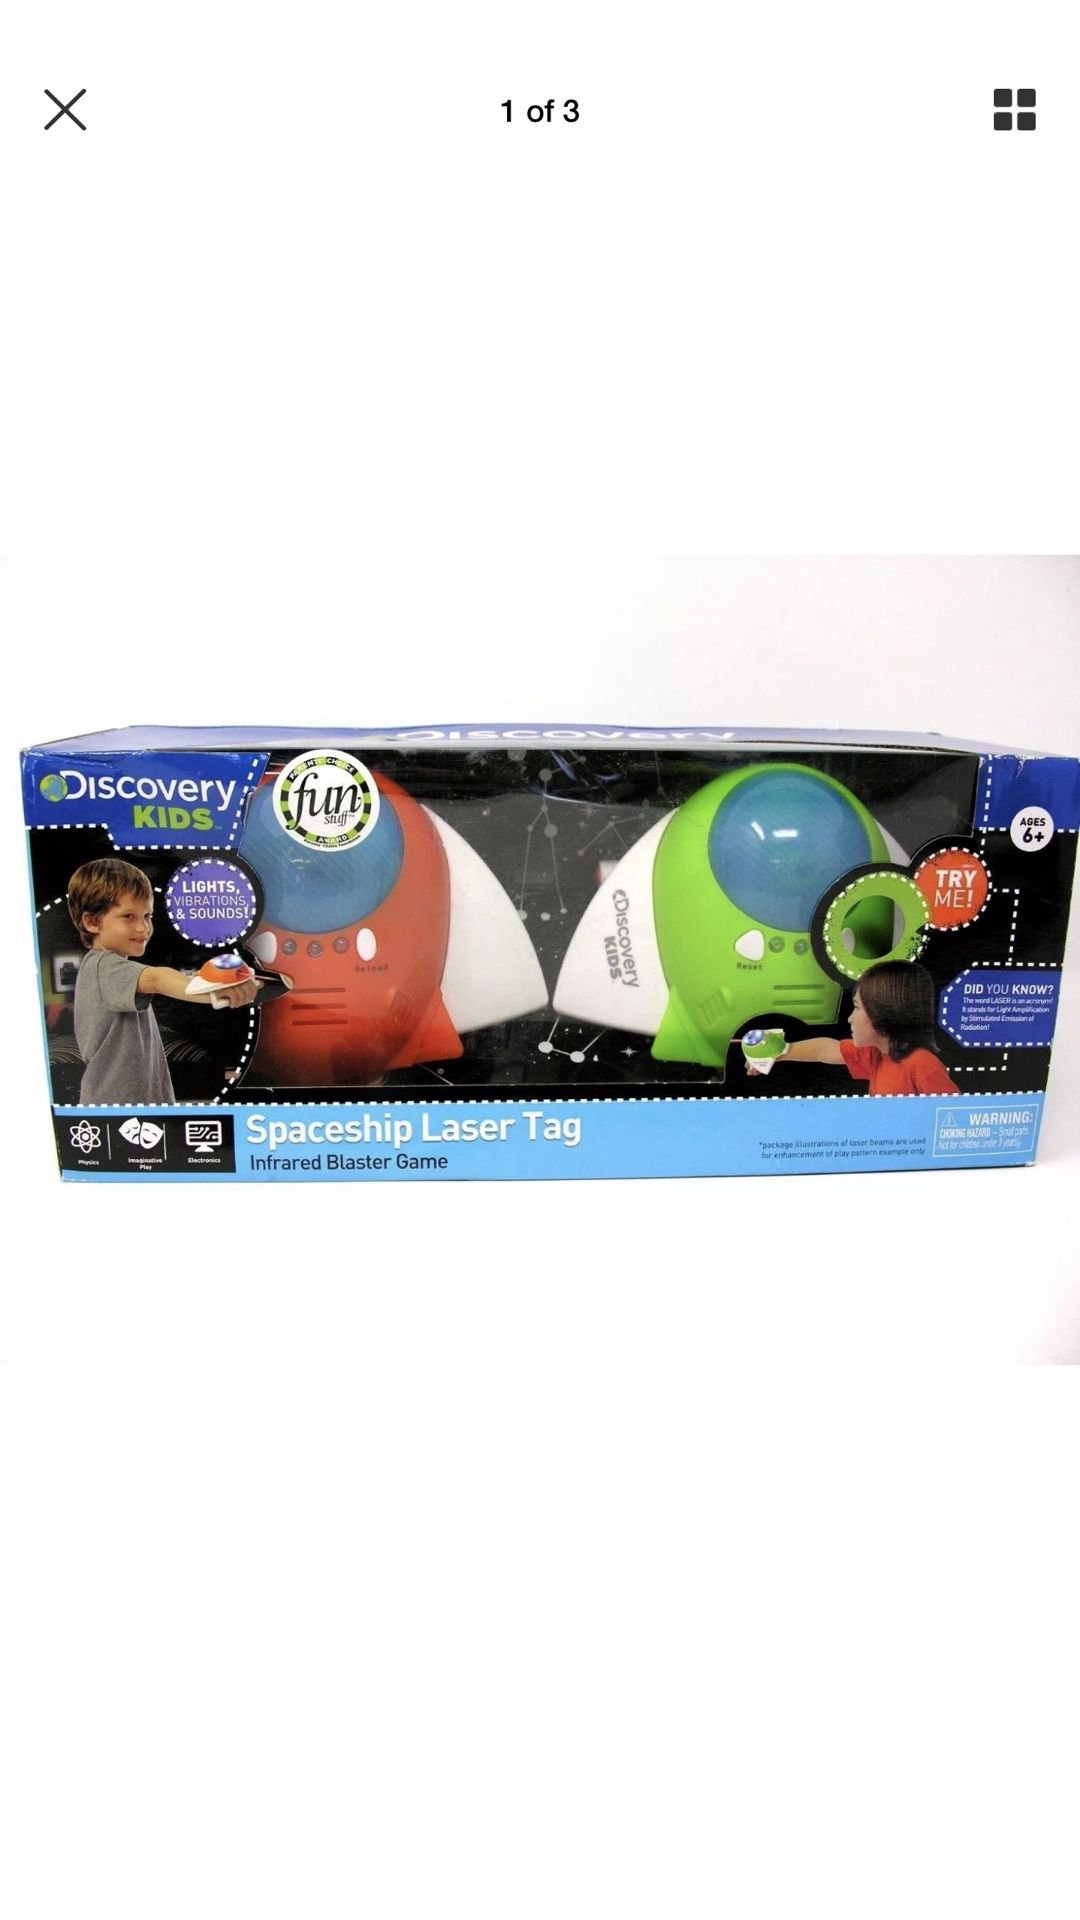 Discovery Kids Spaceship Laser Tag shooting game!